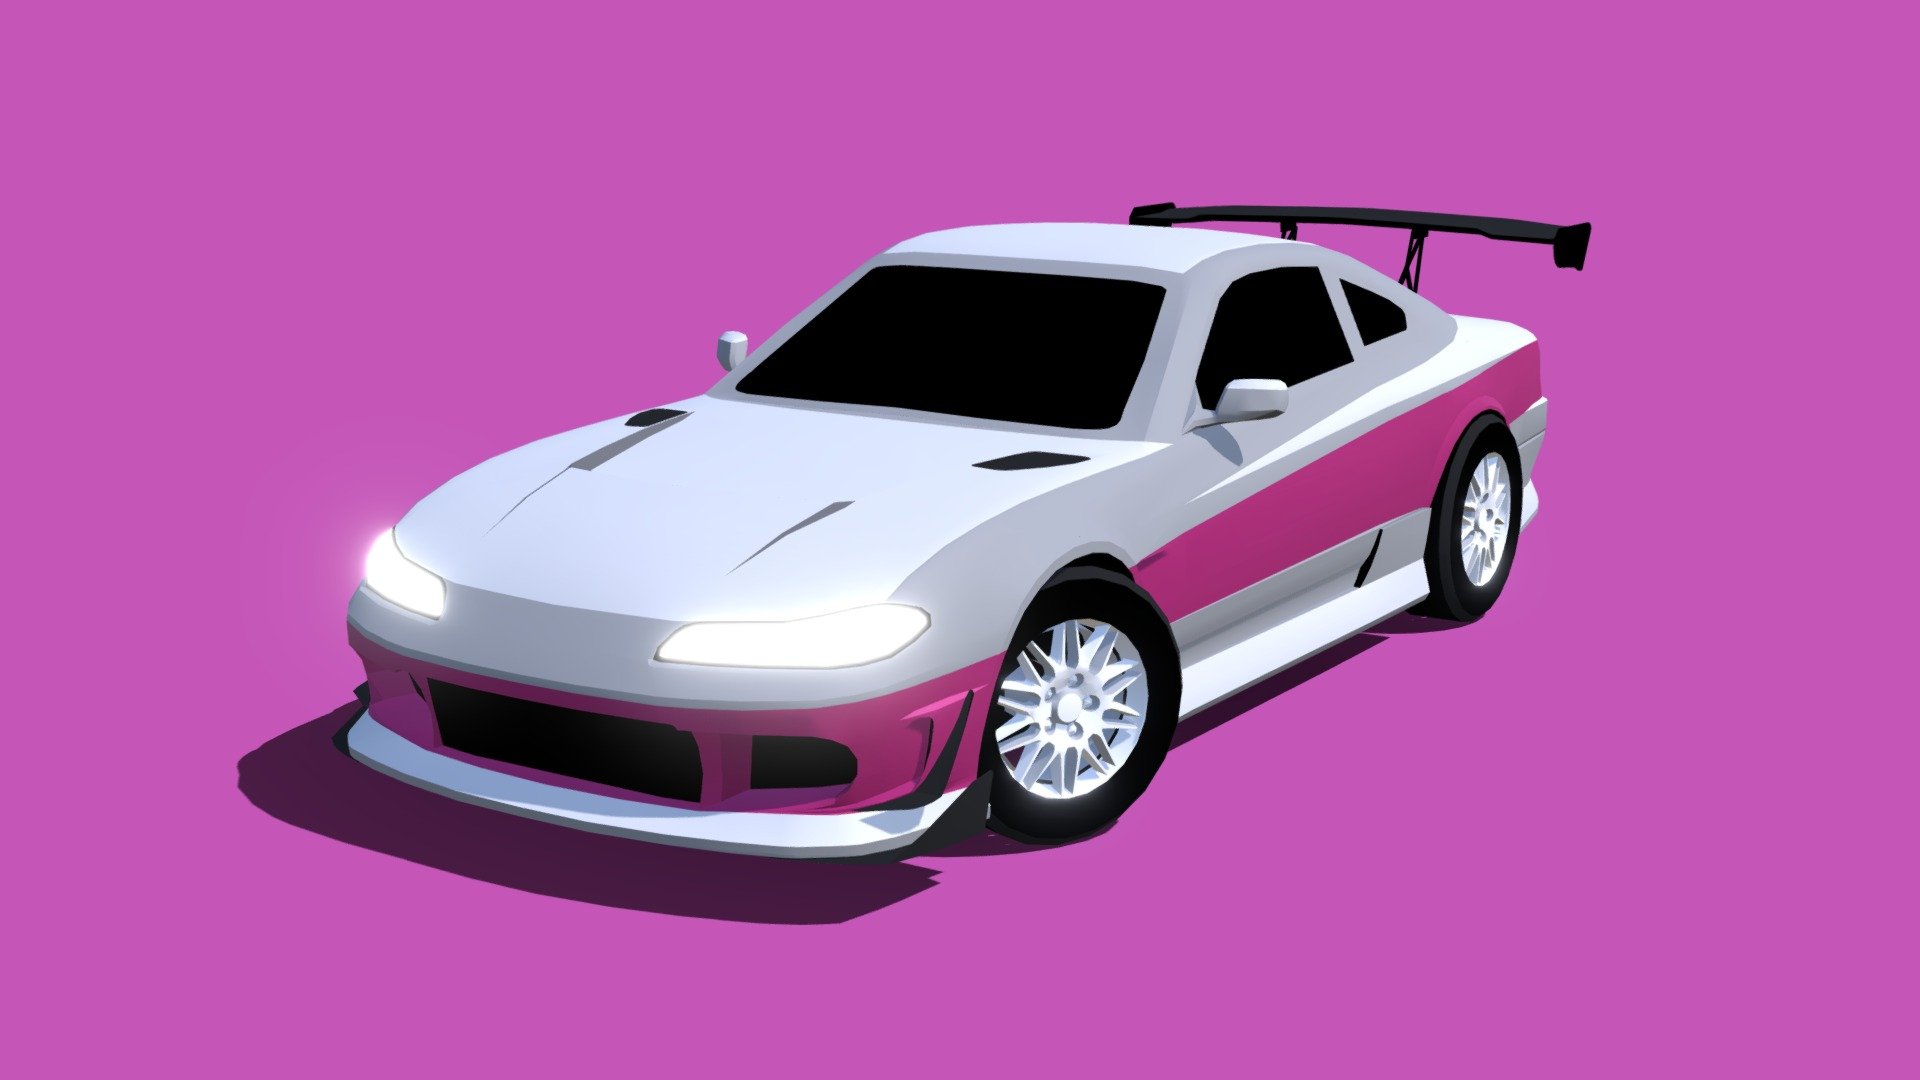 This is “Lissa”, a stylized car that is included in my 3D asset called STYLIZED: Drift Cars, which contains 14 unique drifting cars in 6 colors. Available in the Unity Asset Store and Sketchfab.

If you have any question, please write it in the comment section below 3d model